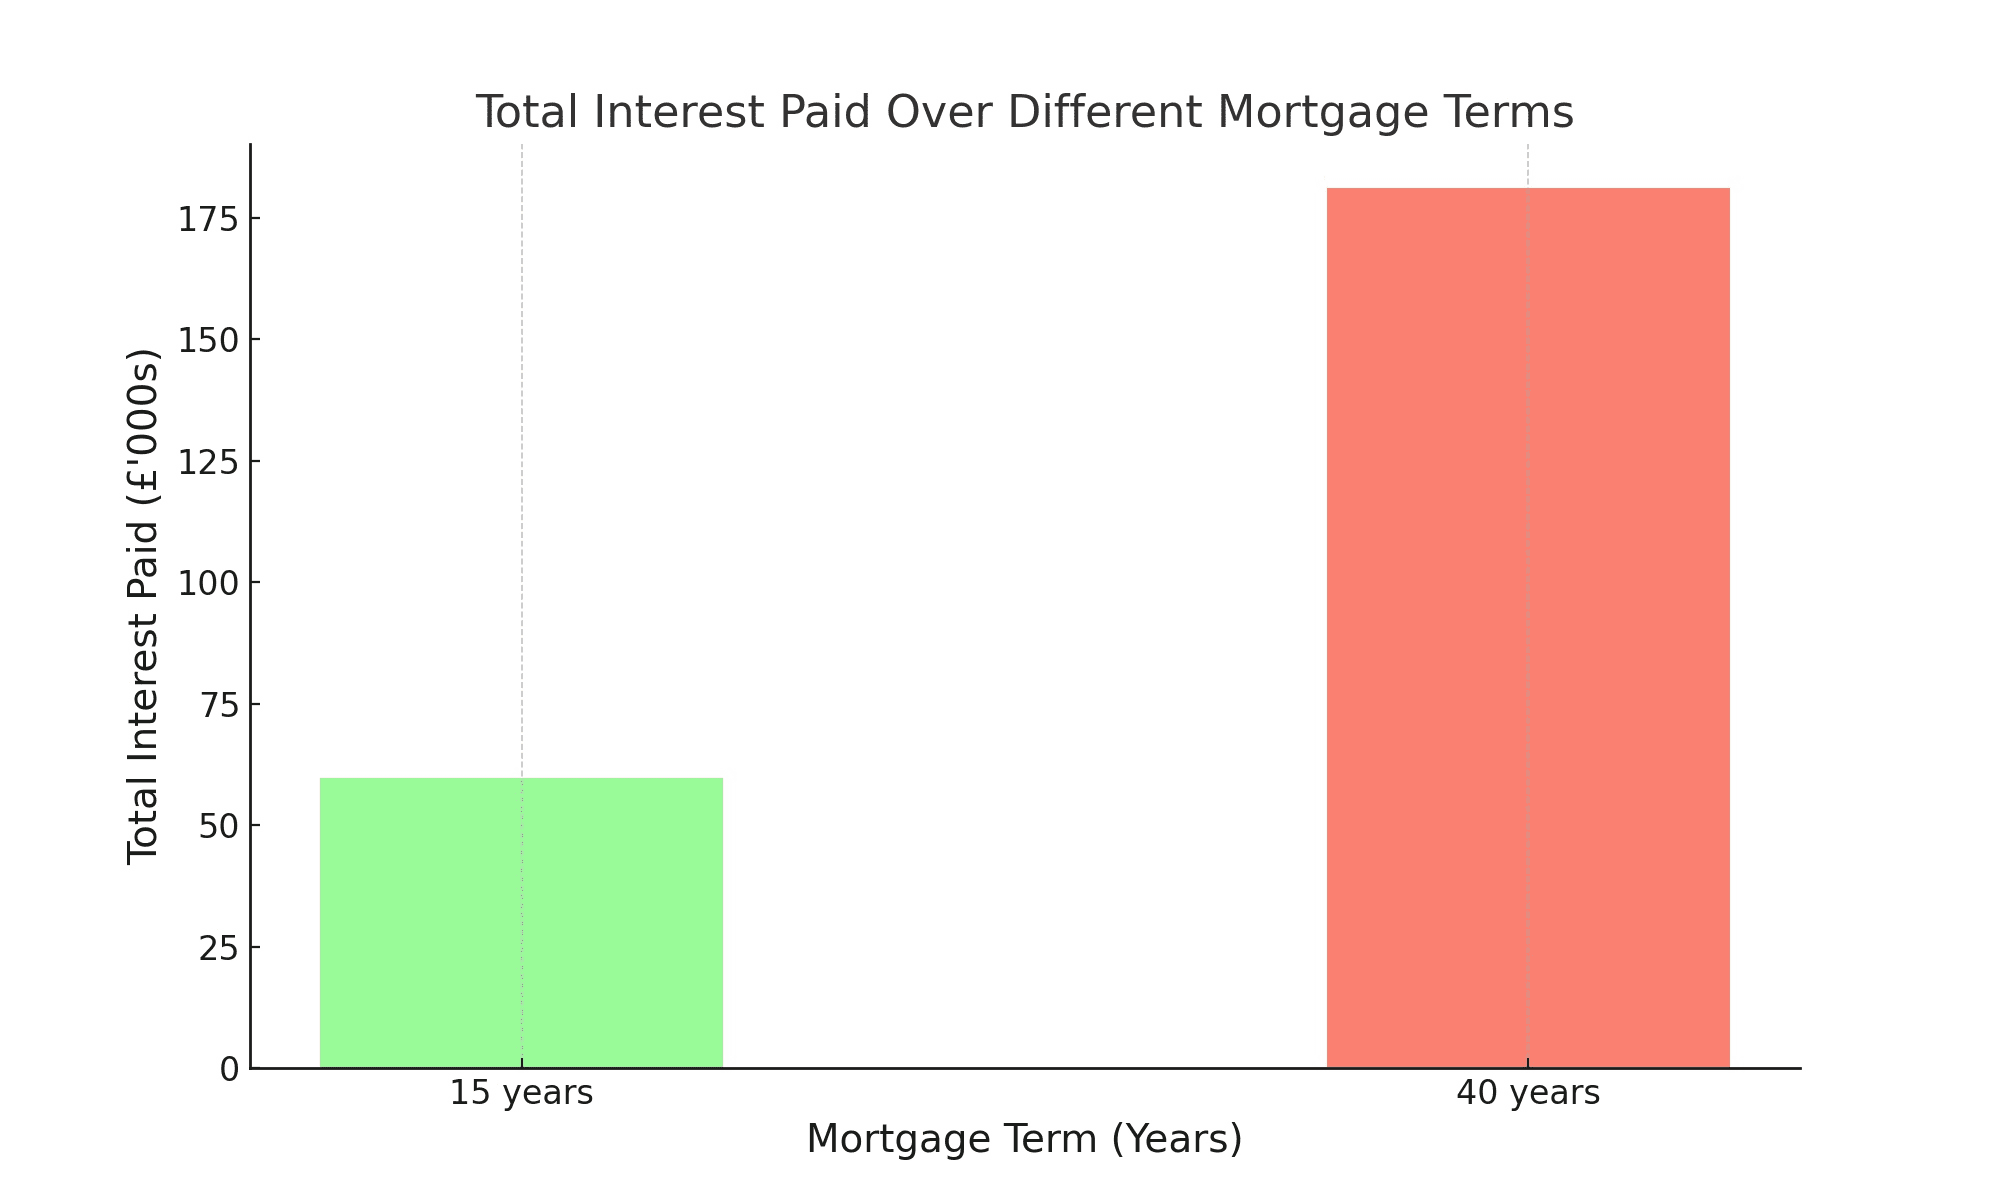 Total interest paid over a 15 year compared to a 40 year mortgage term